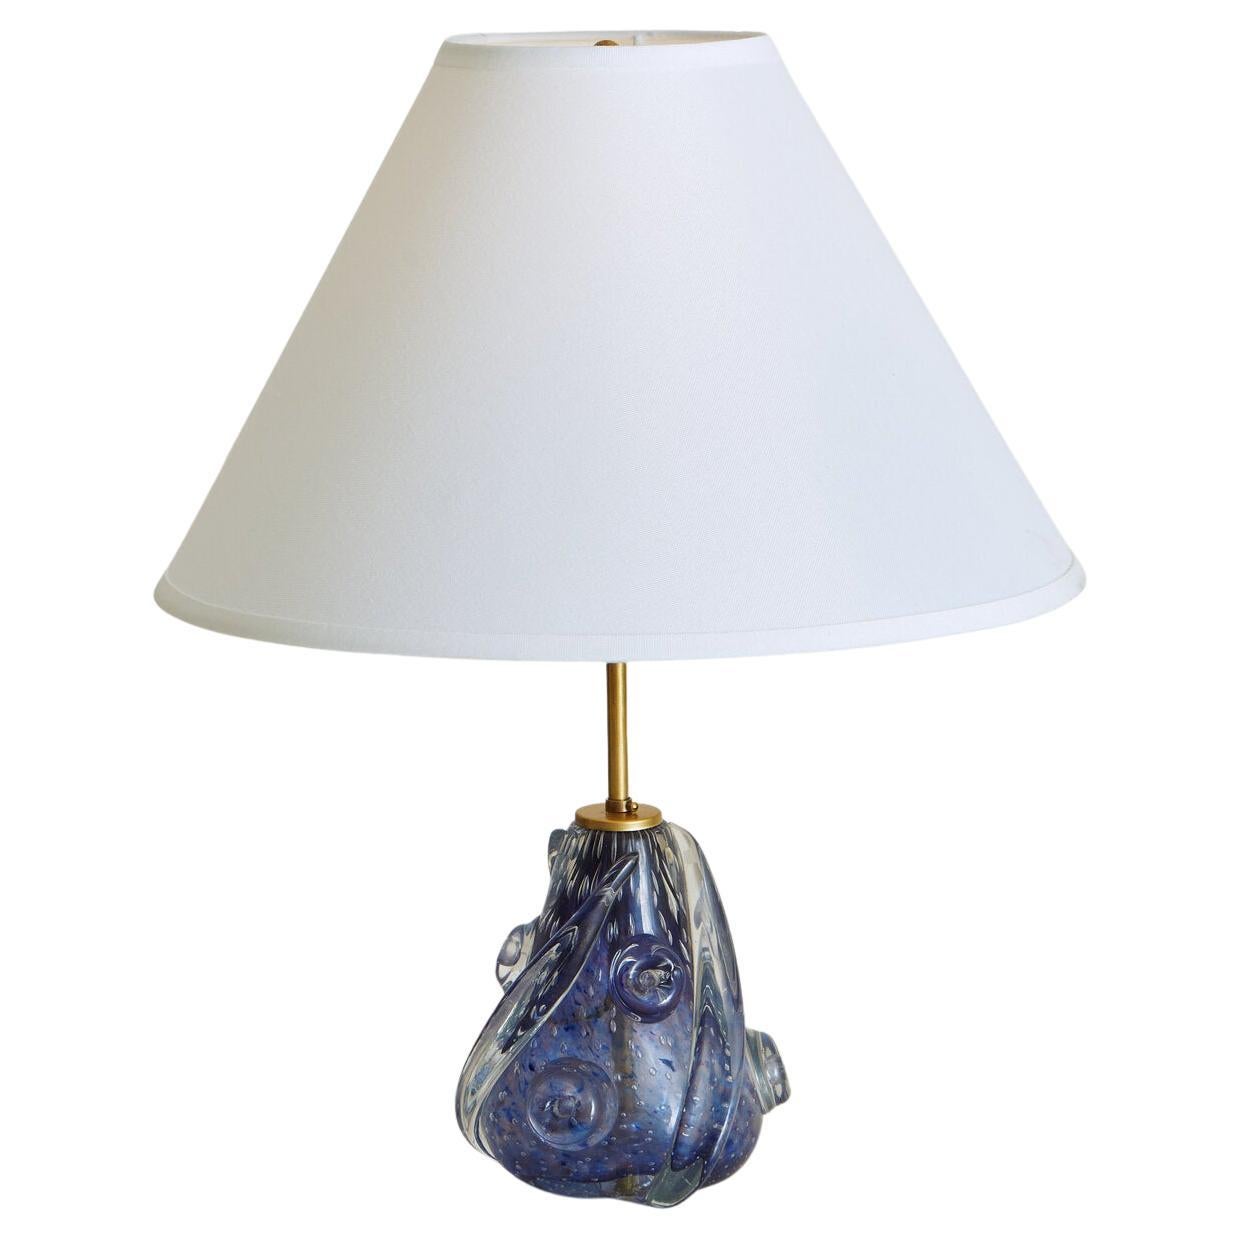 Bullicante Glass Table Lamp Attributed to Barovier & Toso